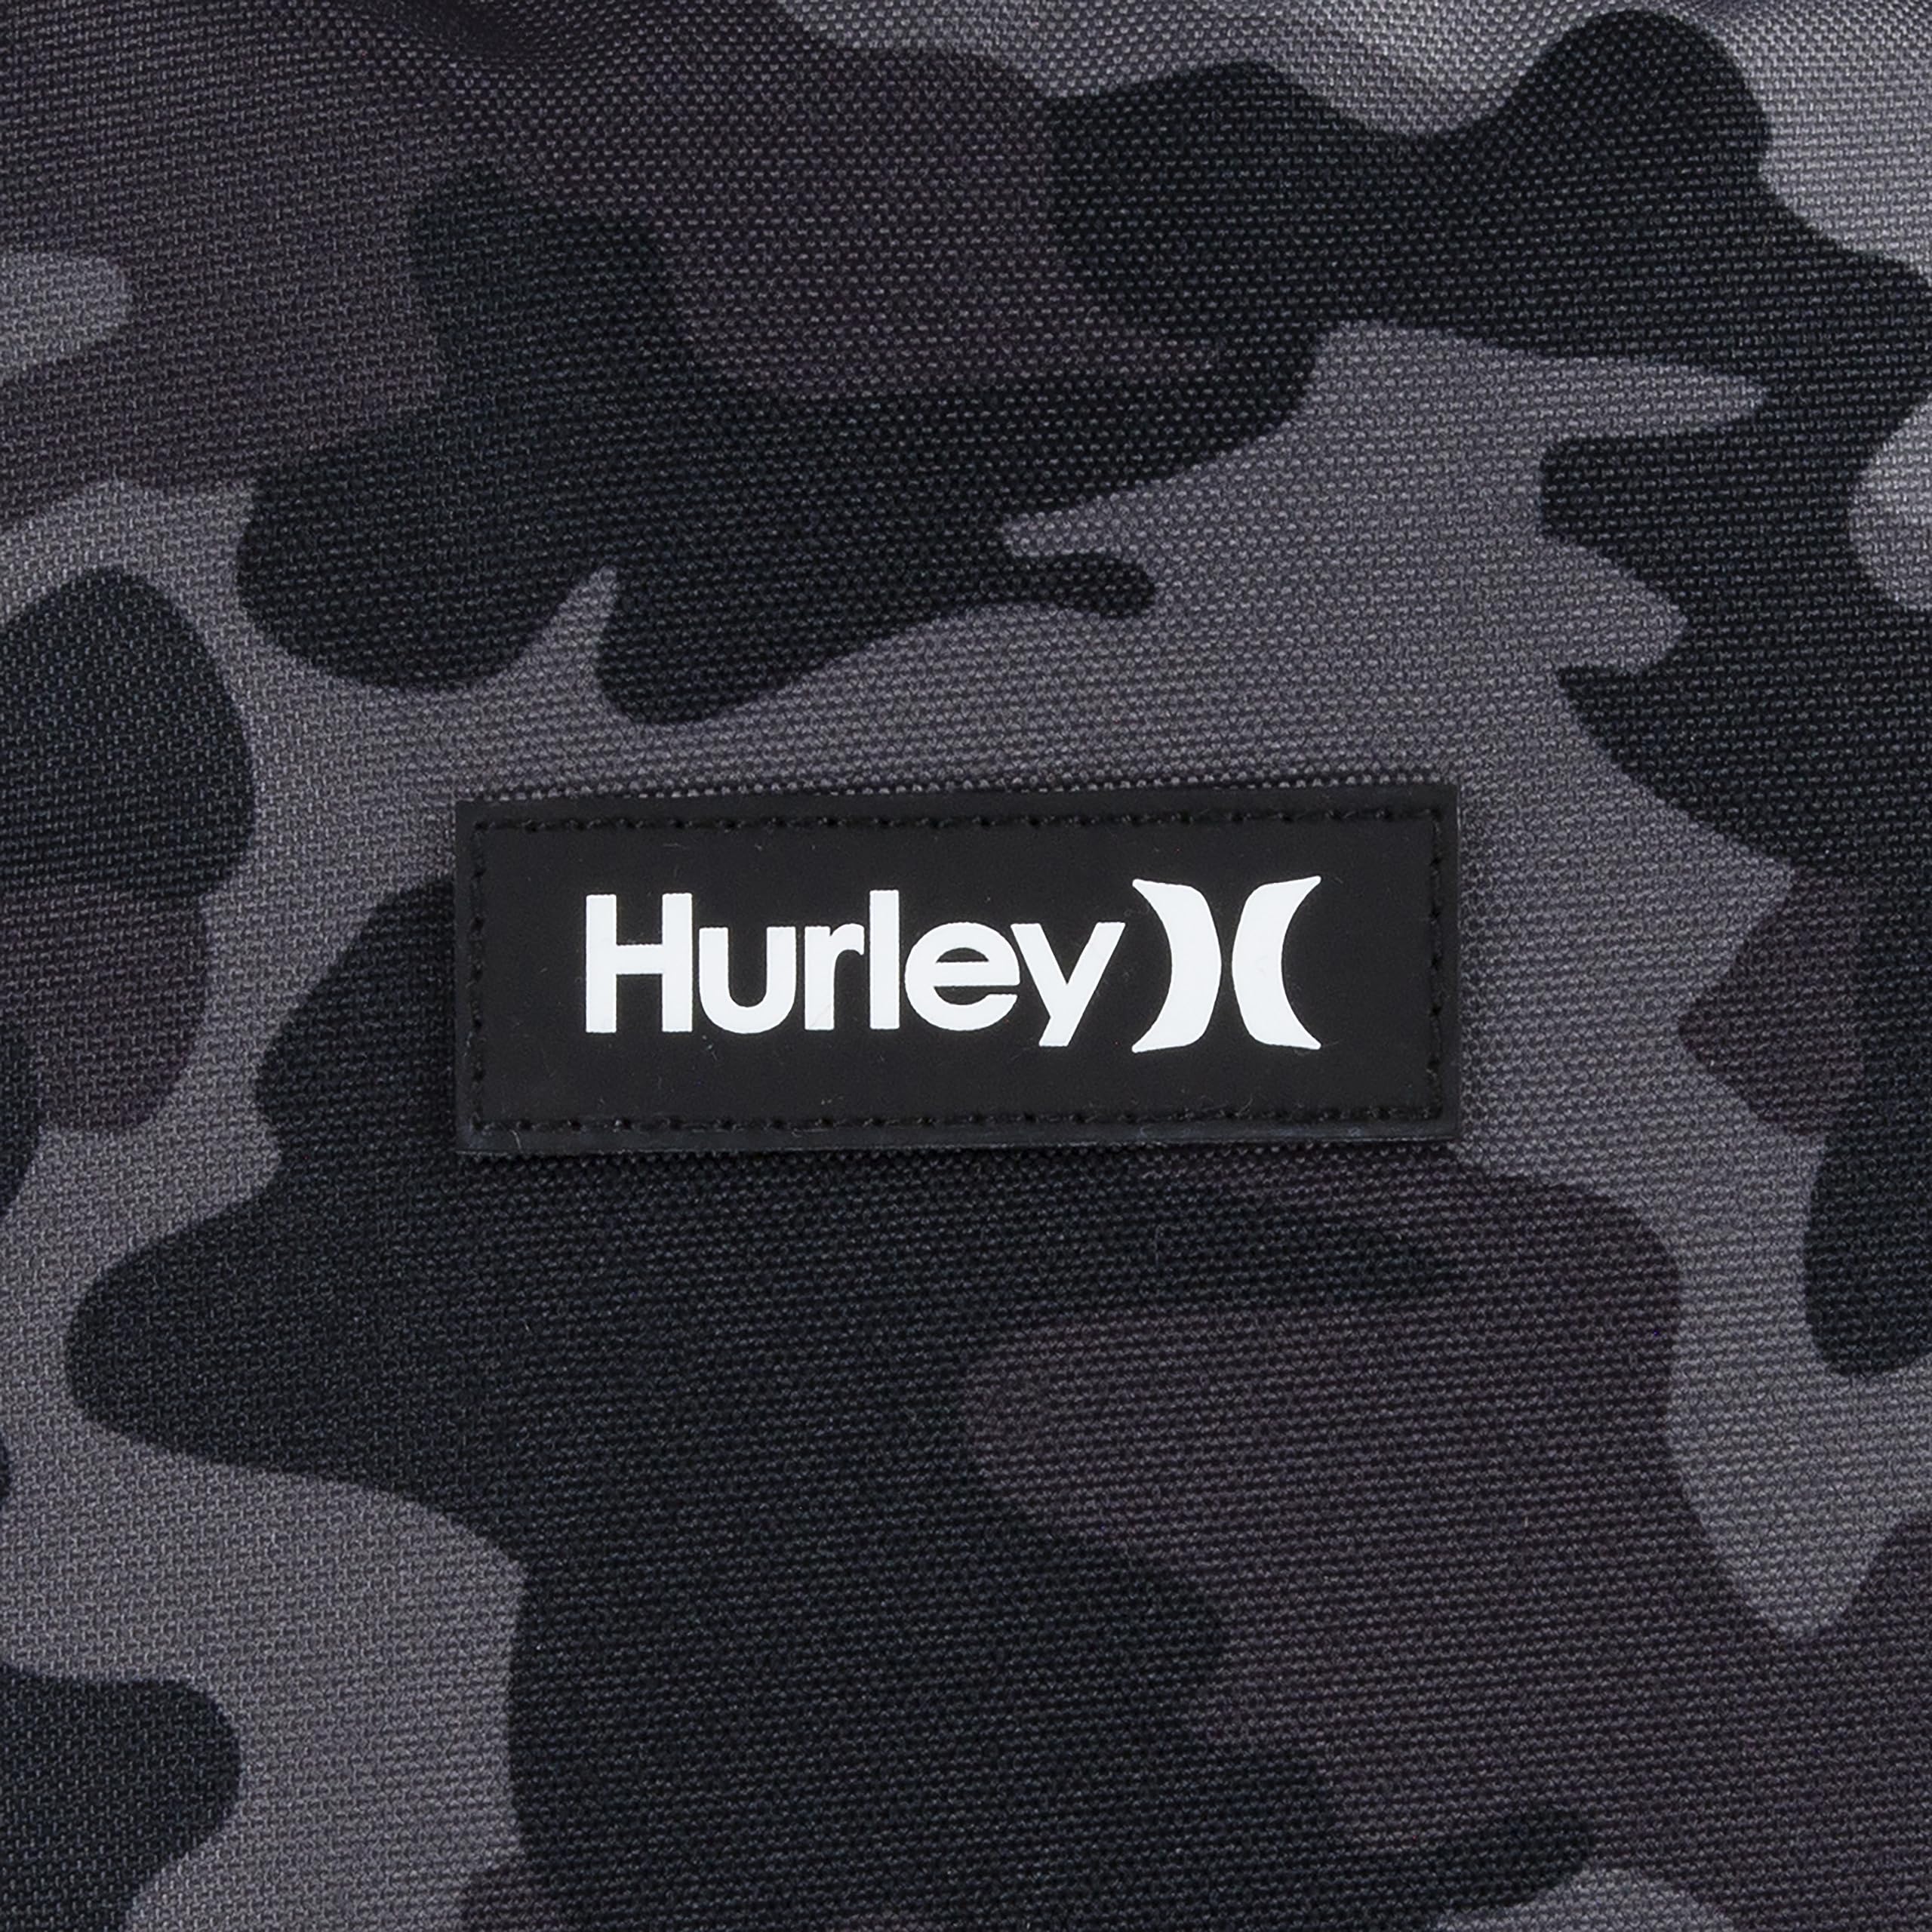 Hurley Unisex-Adults One and Only Backpack, Grey Camo Shark, Large